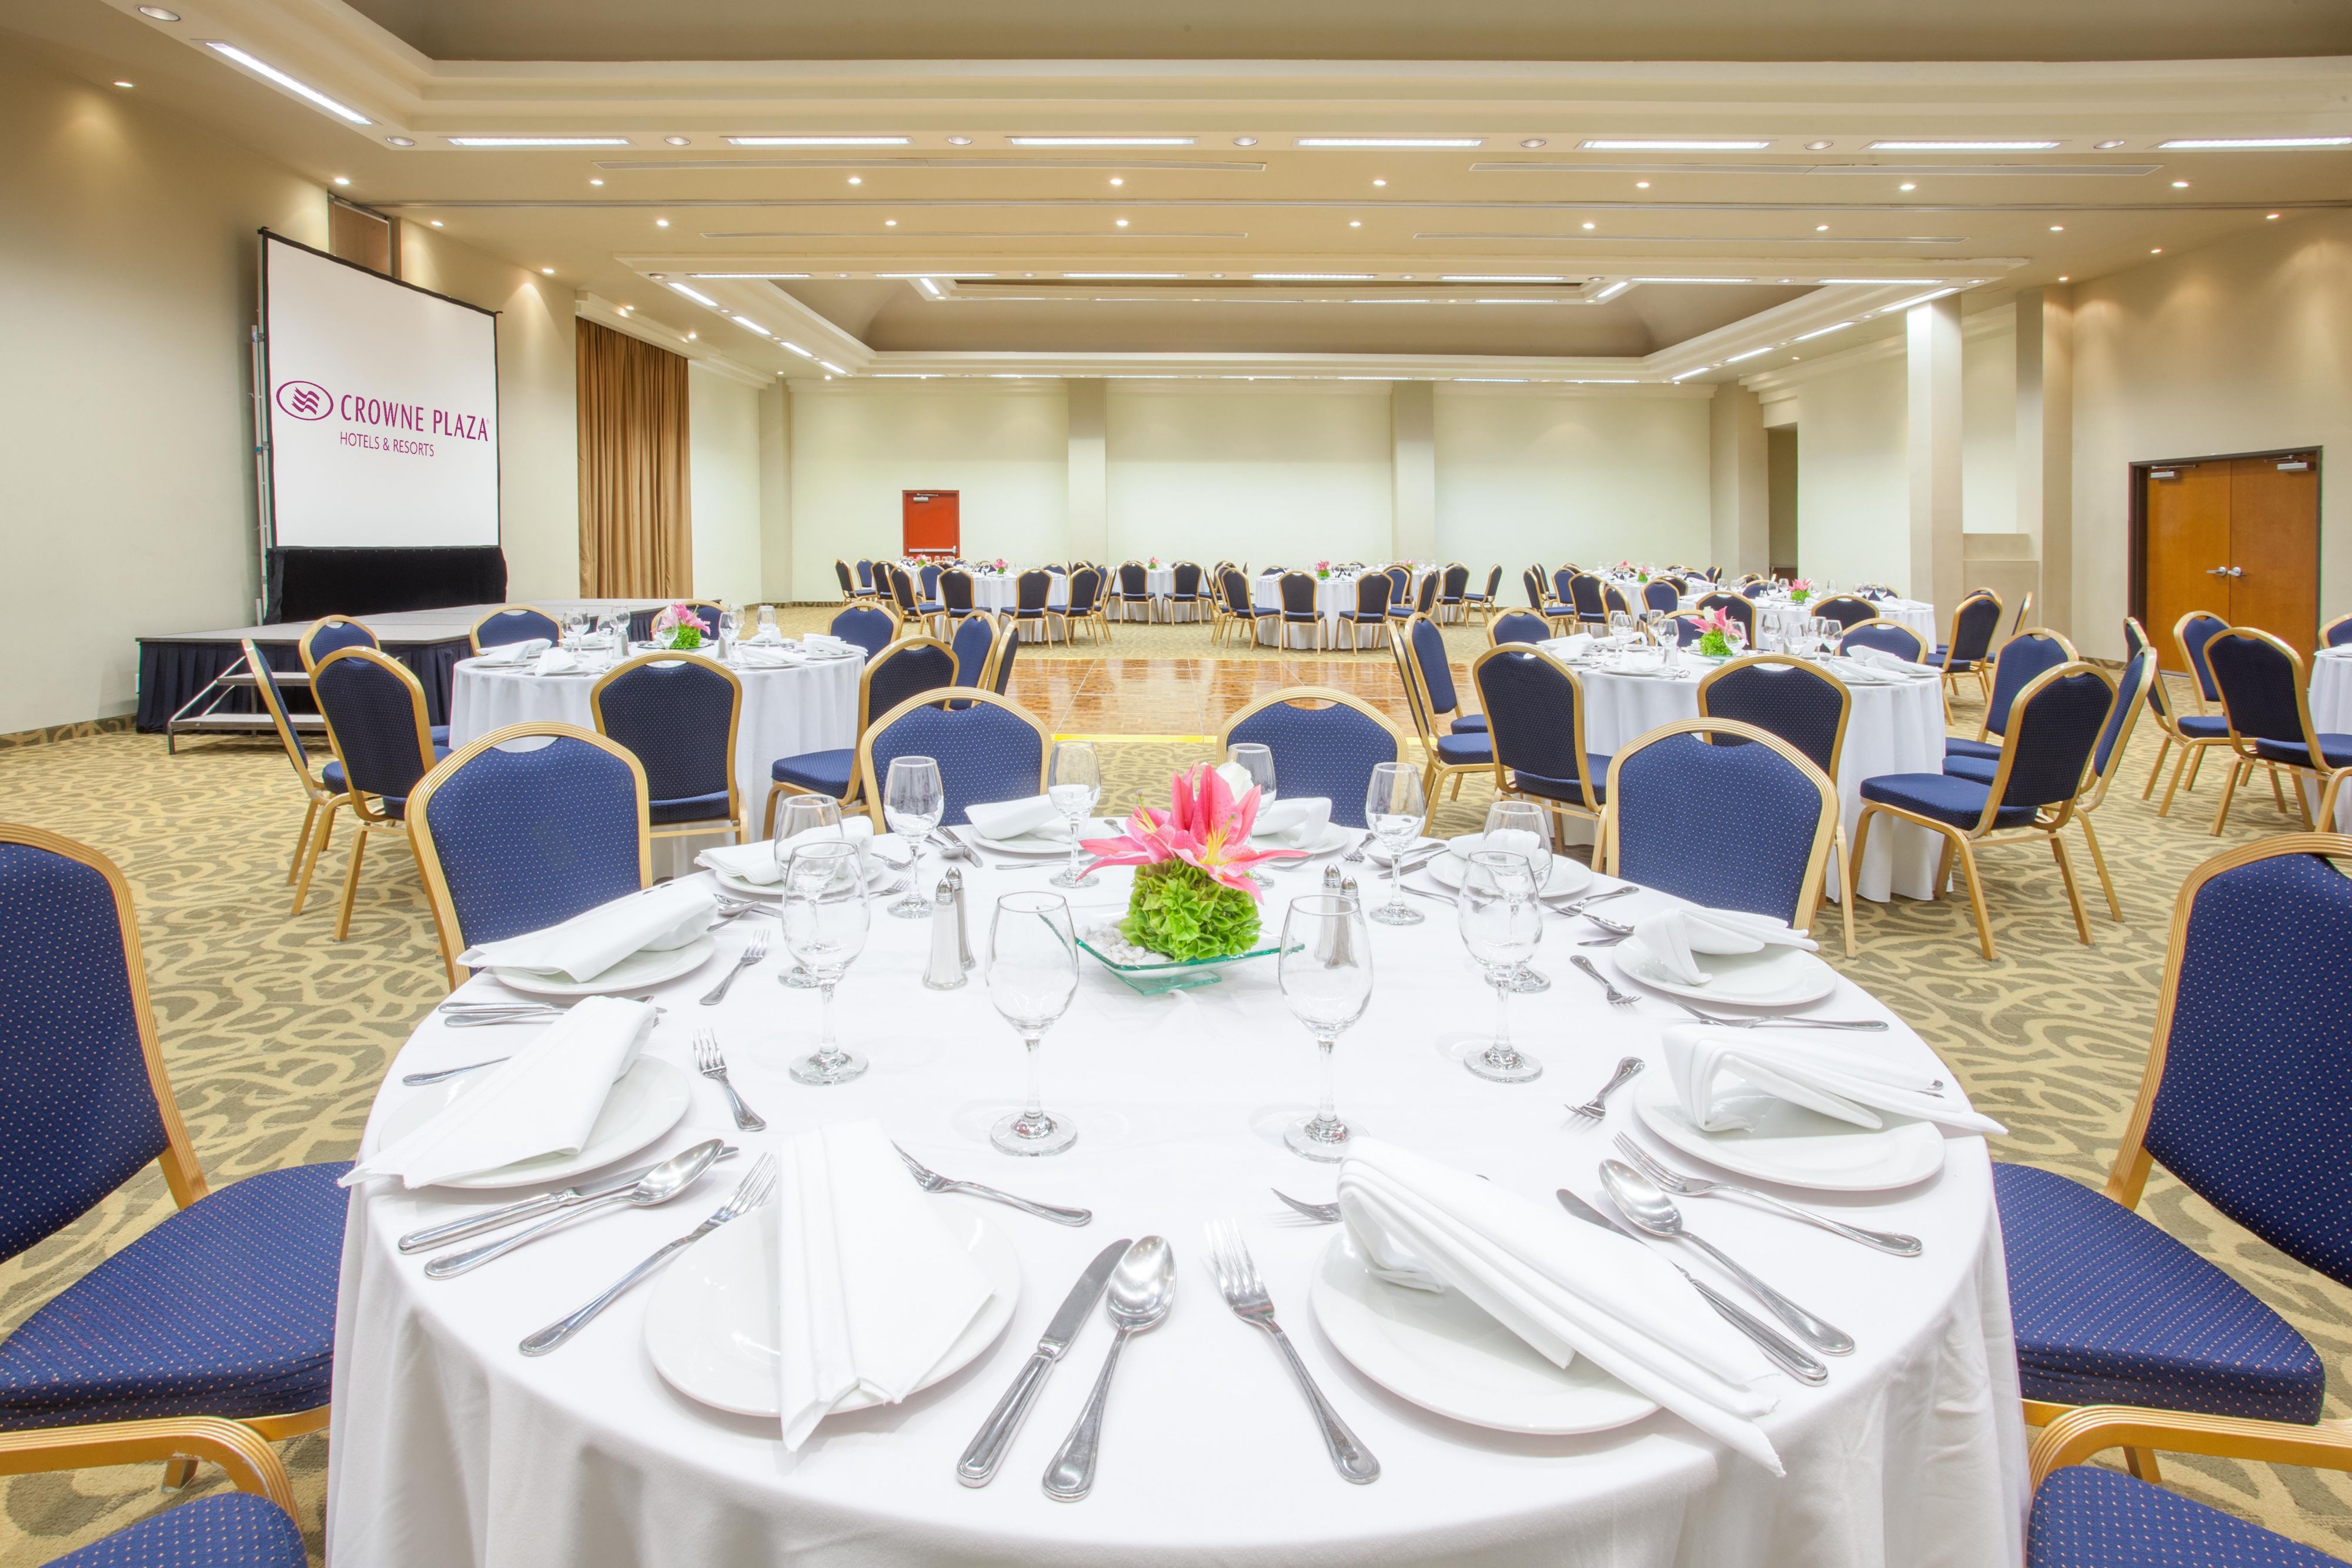 Let us take care of you and your event at Gran Apodaca Ballroom